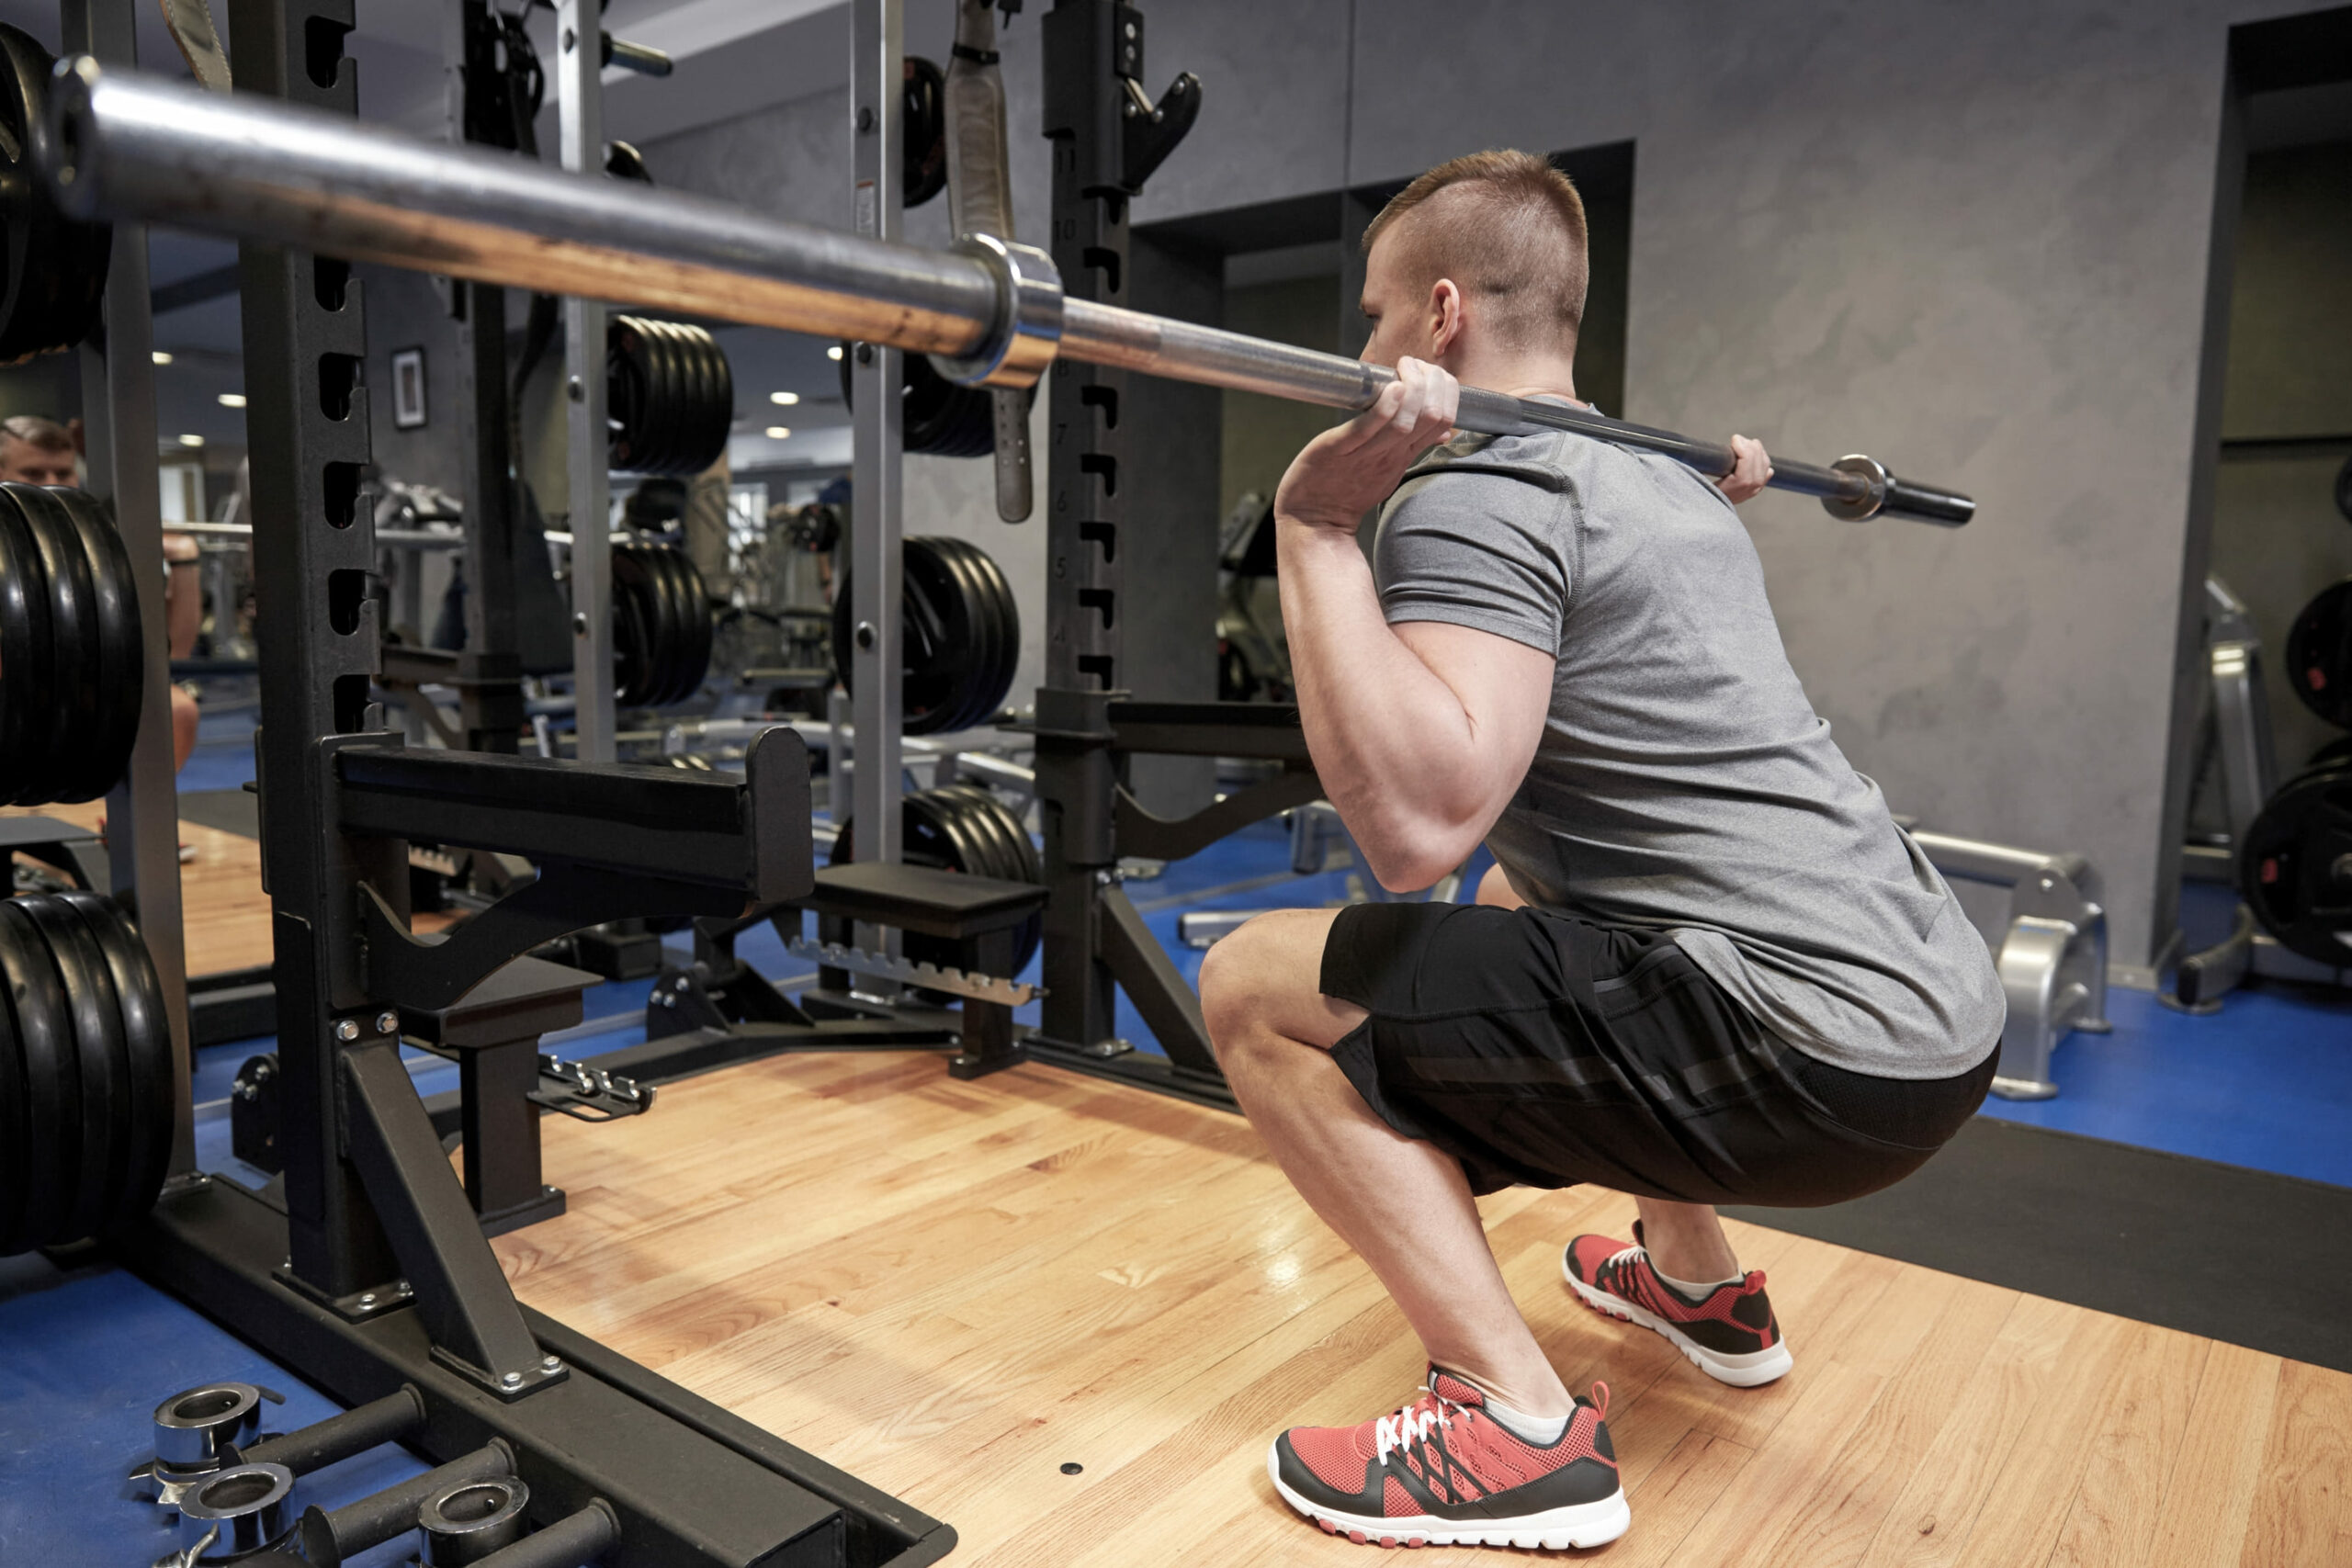 How to learn to perform squats correctly